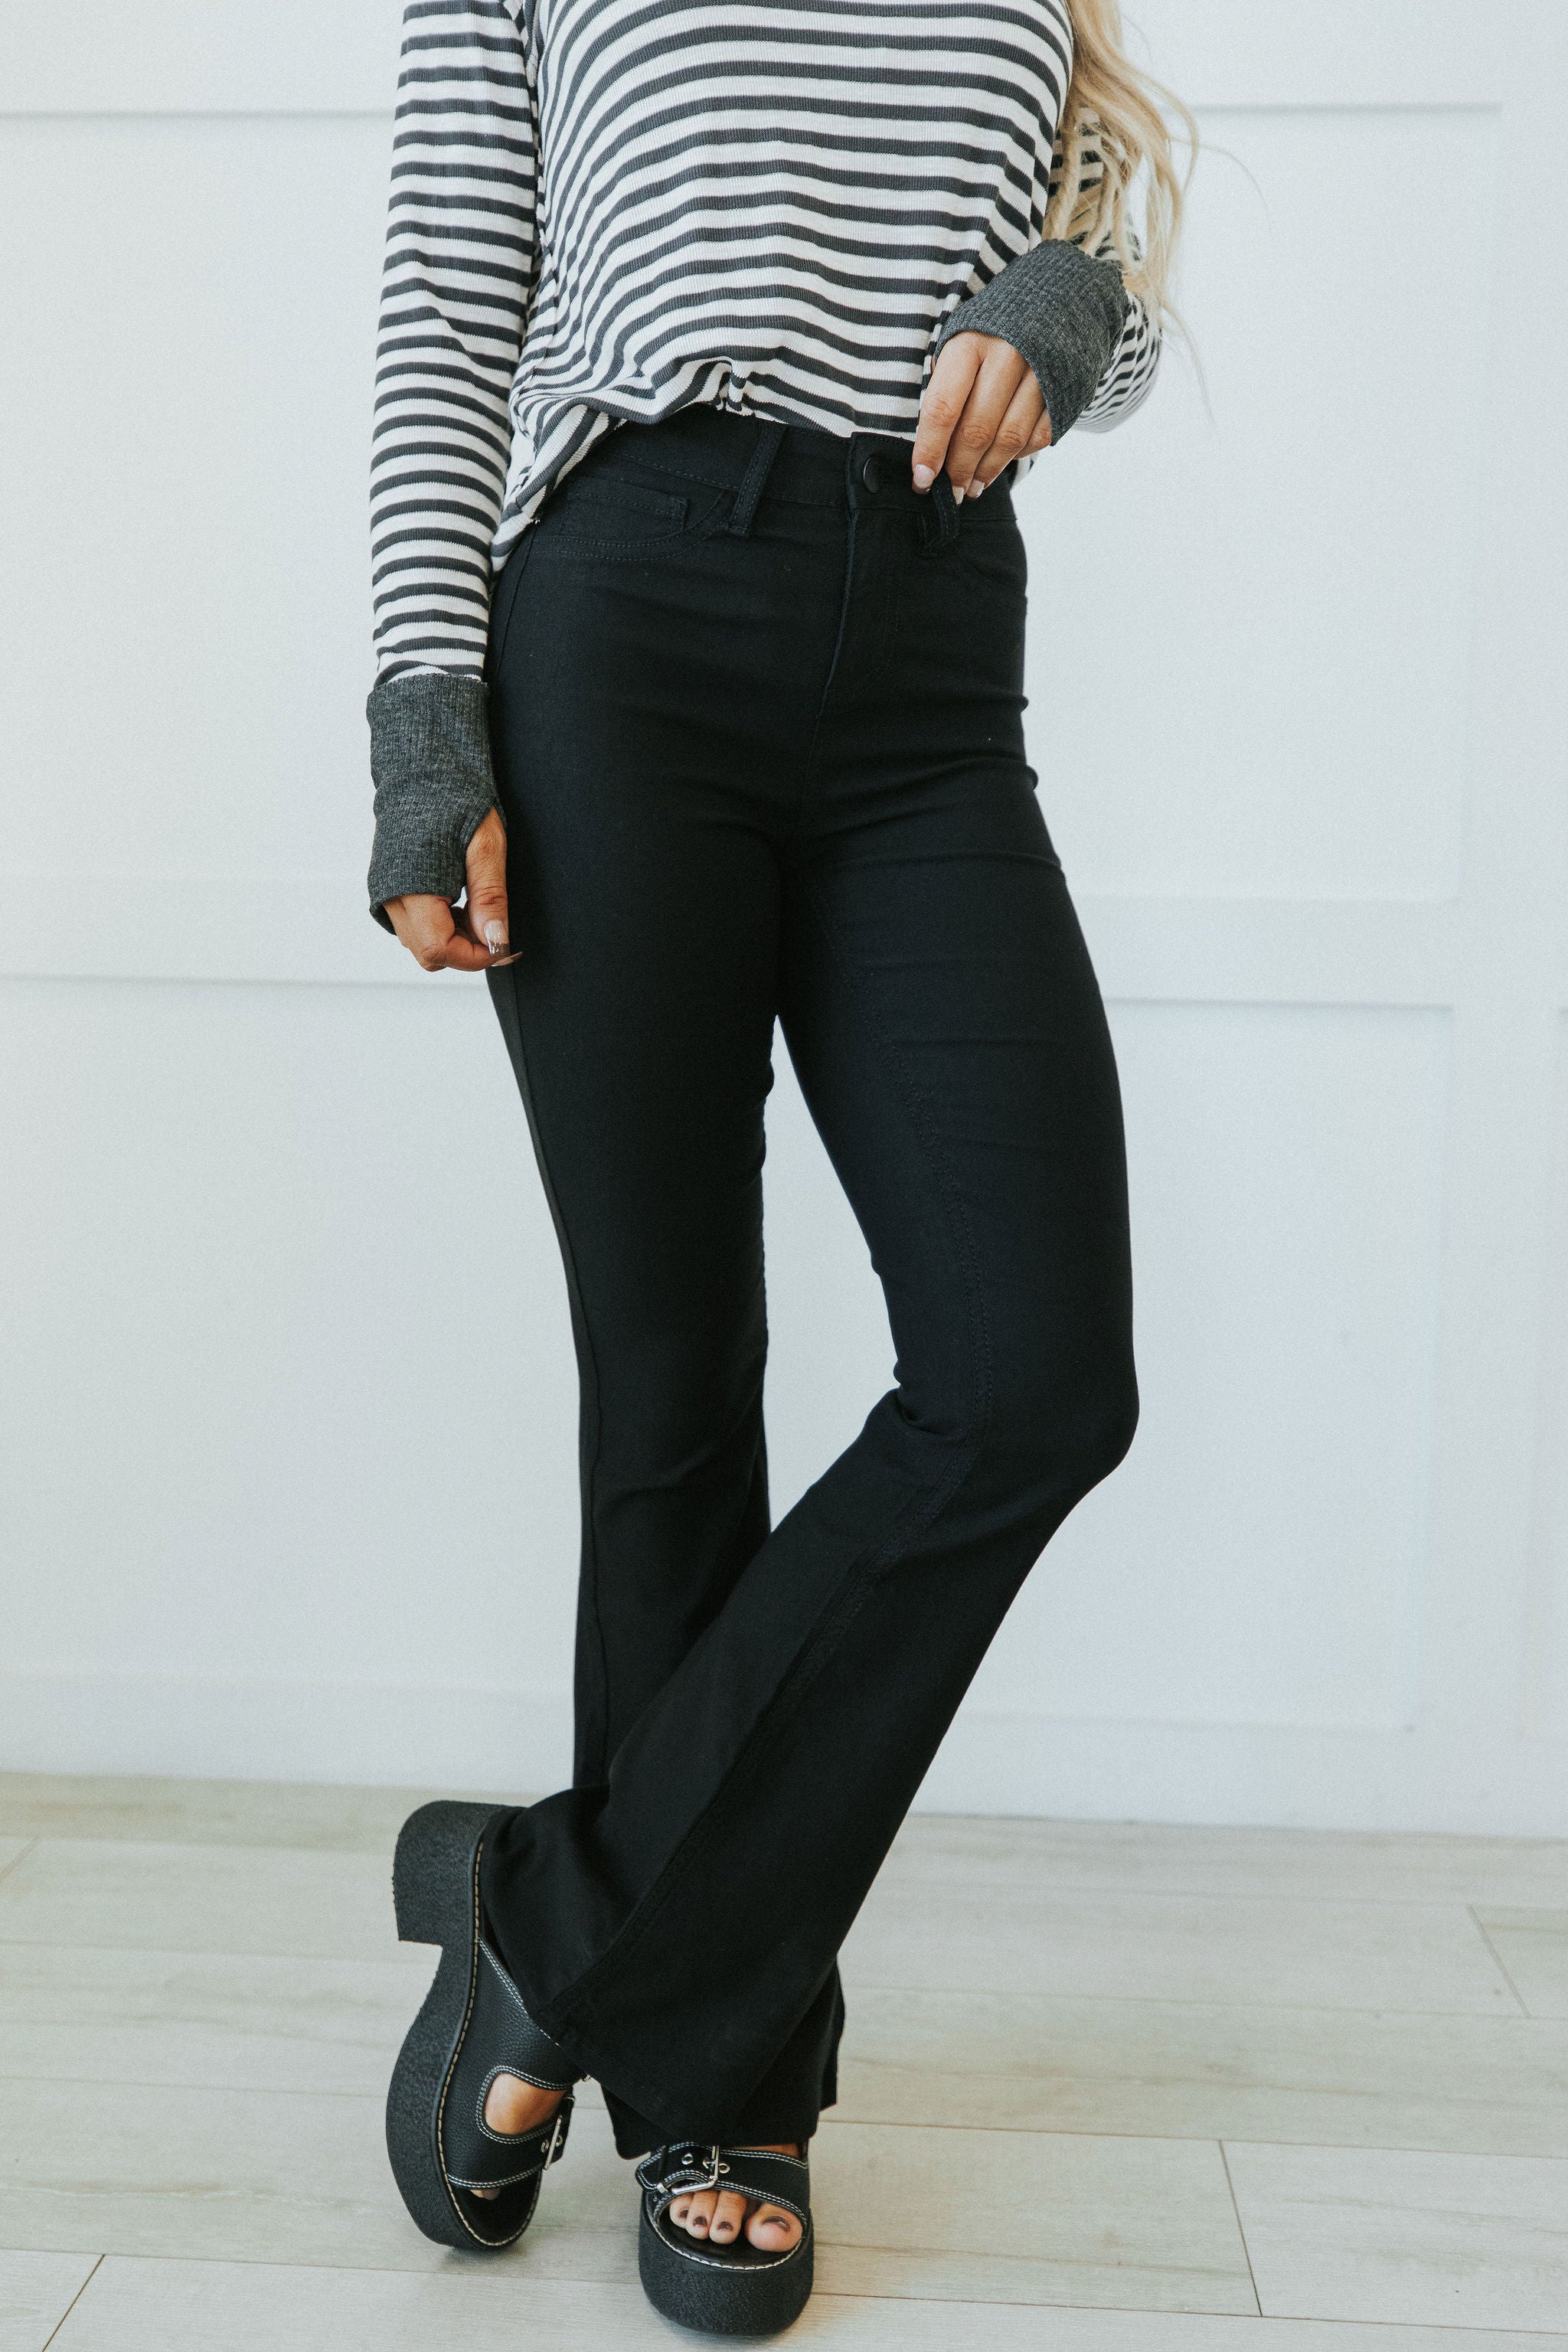 Magic In Your Step Flare Leg Jeans - Black